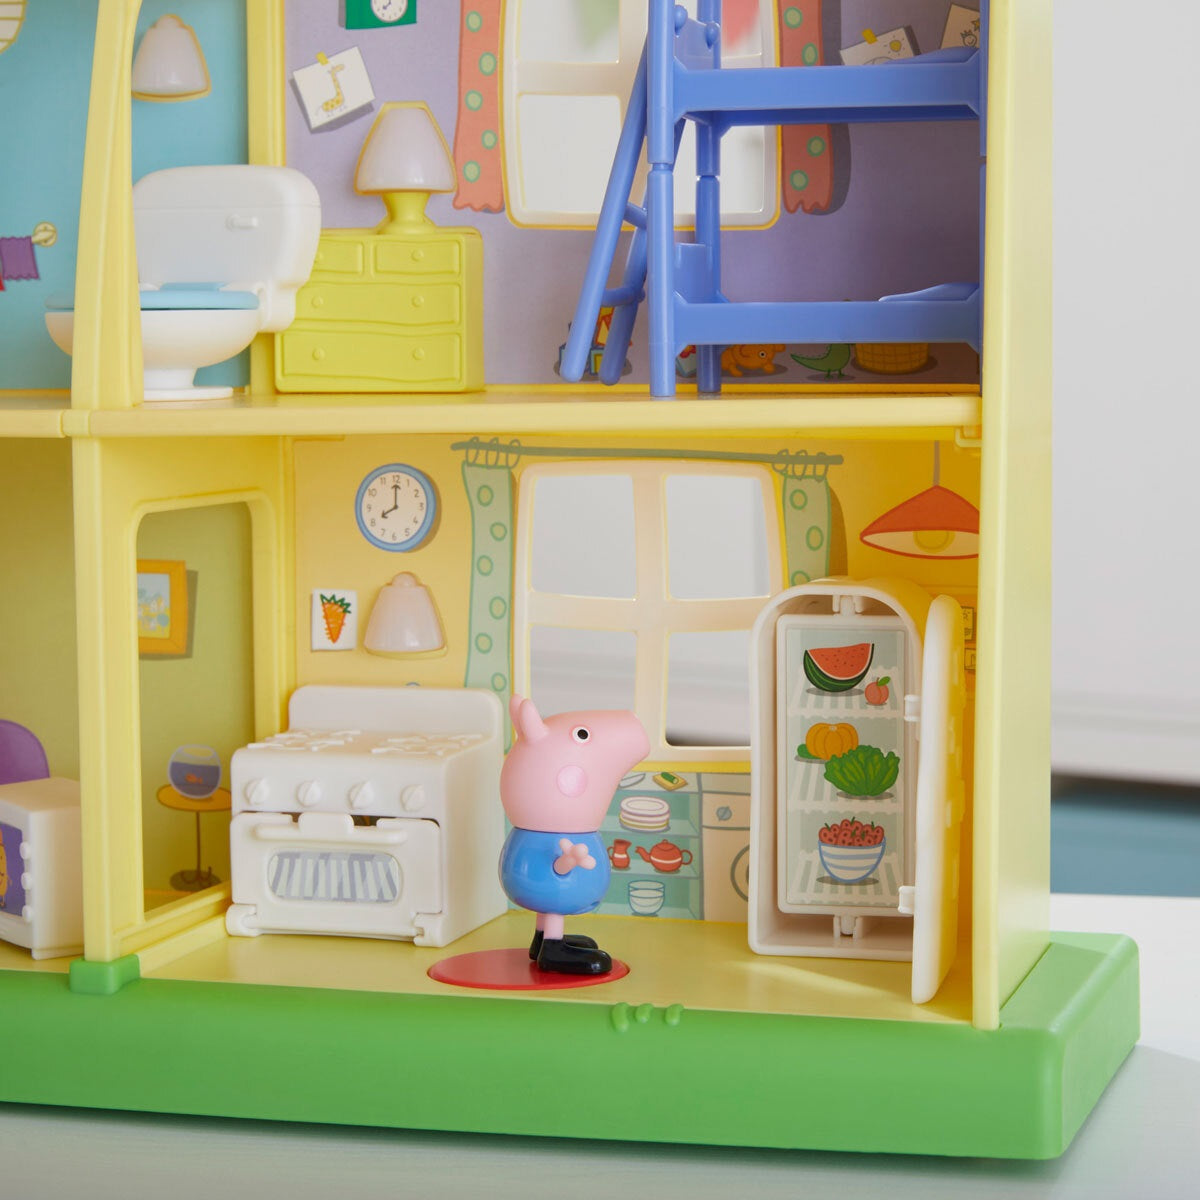 Peppa Pig Peppa's Playtime to Bedtime House Playset